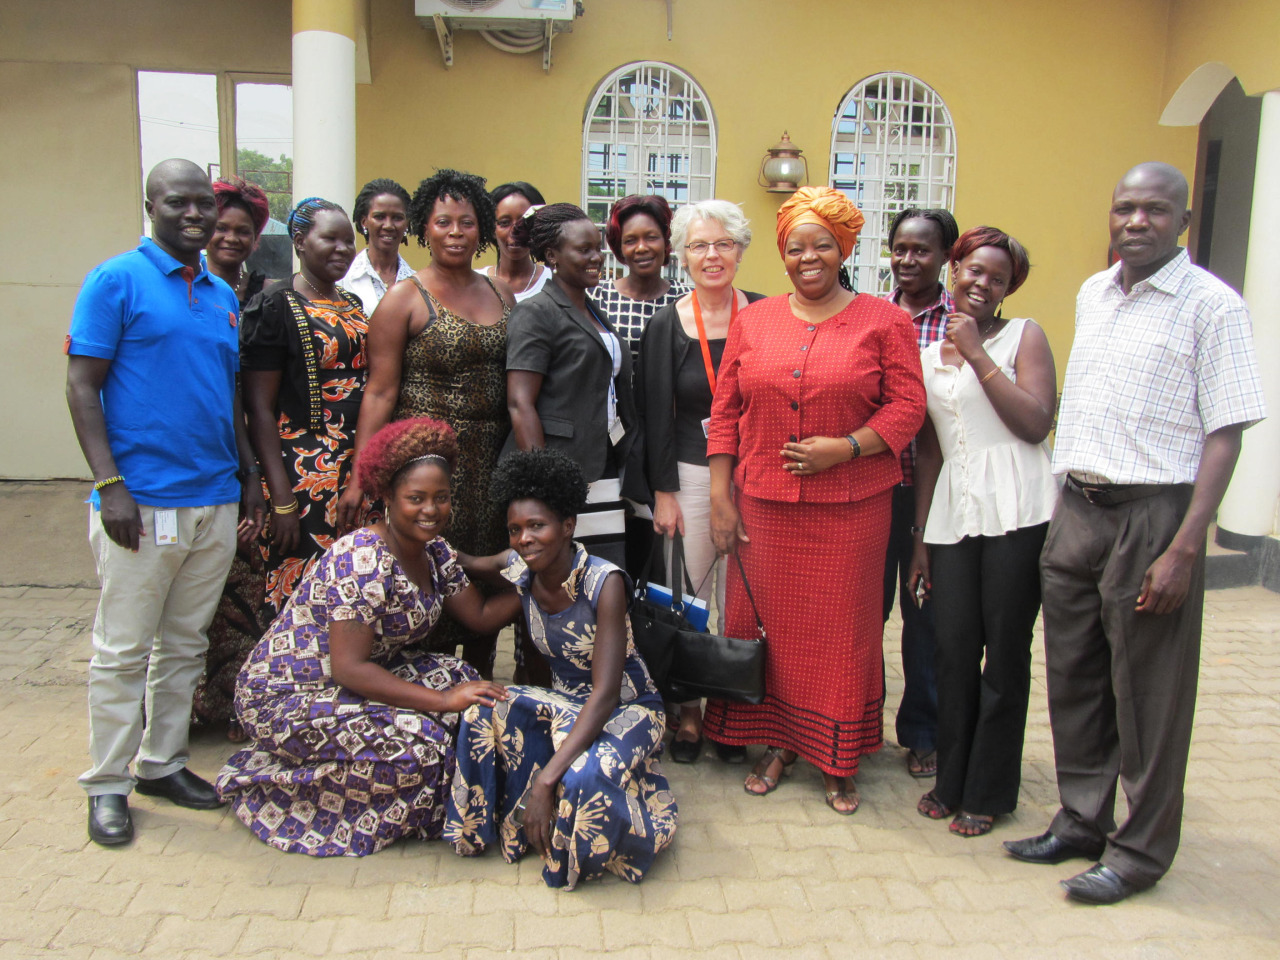 How do you reach key populations? Ask them!
Staff in IntraHealth’s South Sudan office facilitated a meeting for Prof. Sheila Tlou, the UNAIDS regional director for Eastern and Southern Africa, and female sex workers to discuss how to increase access...